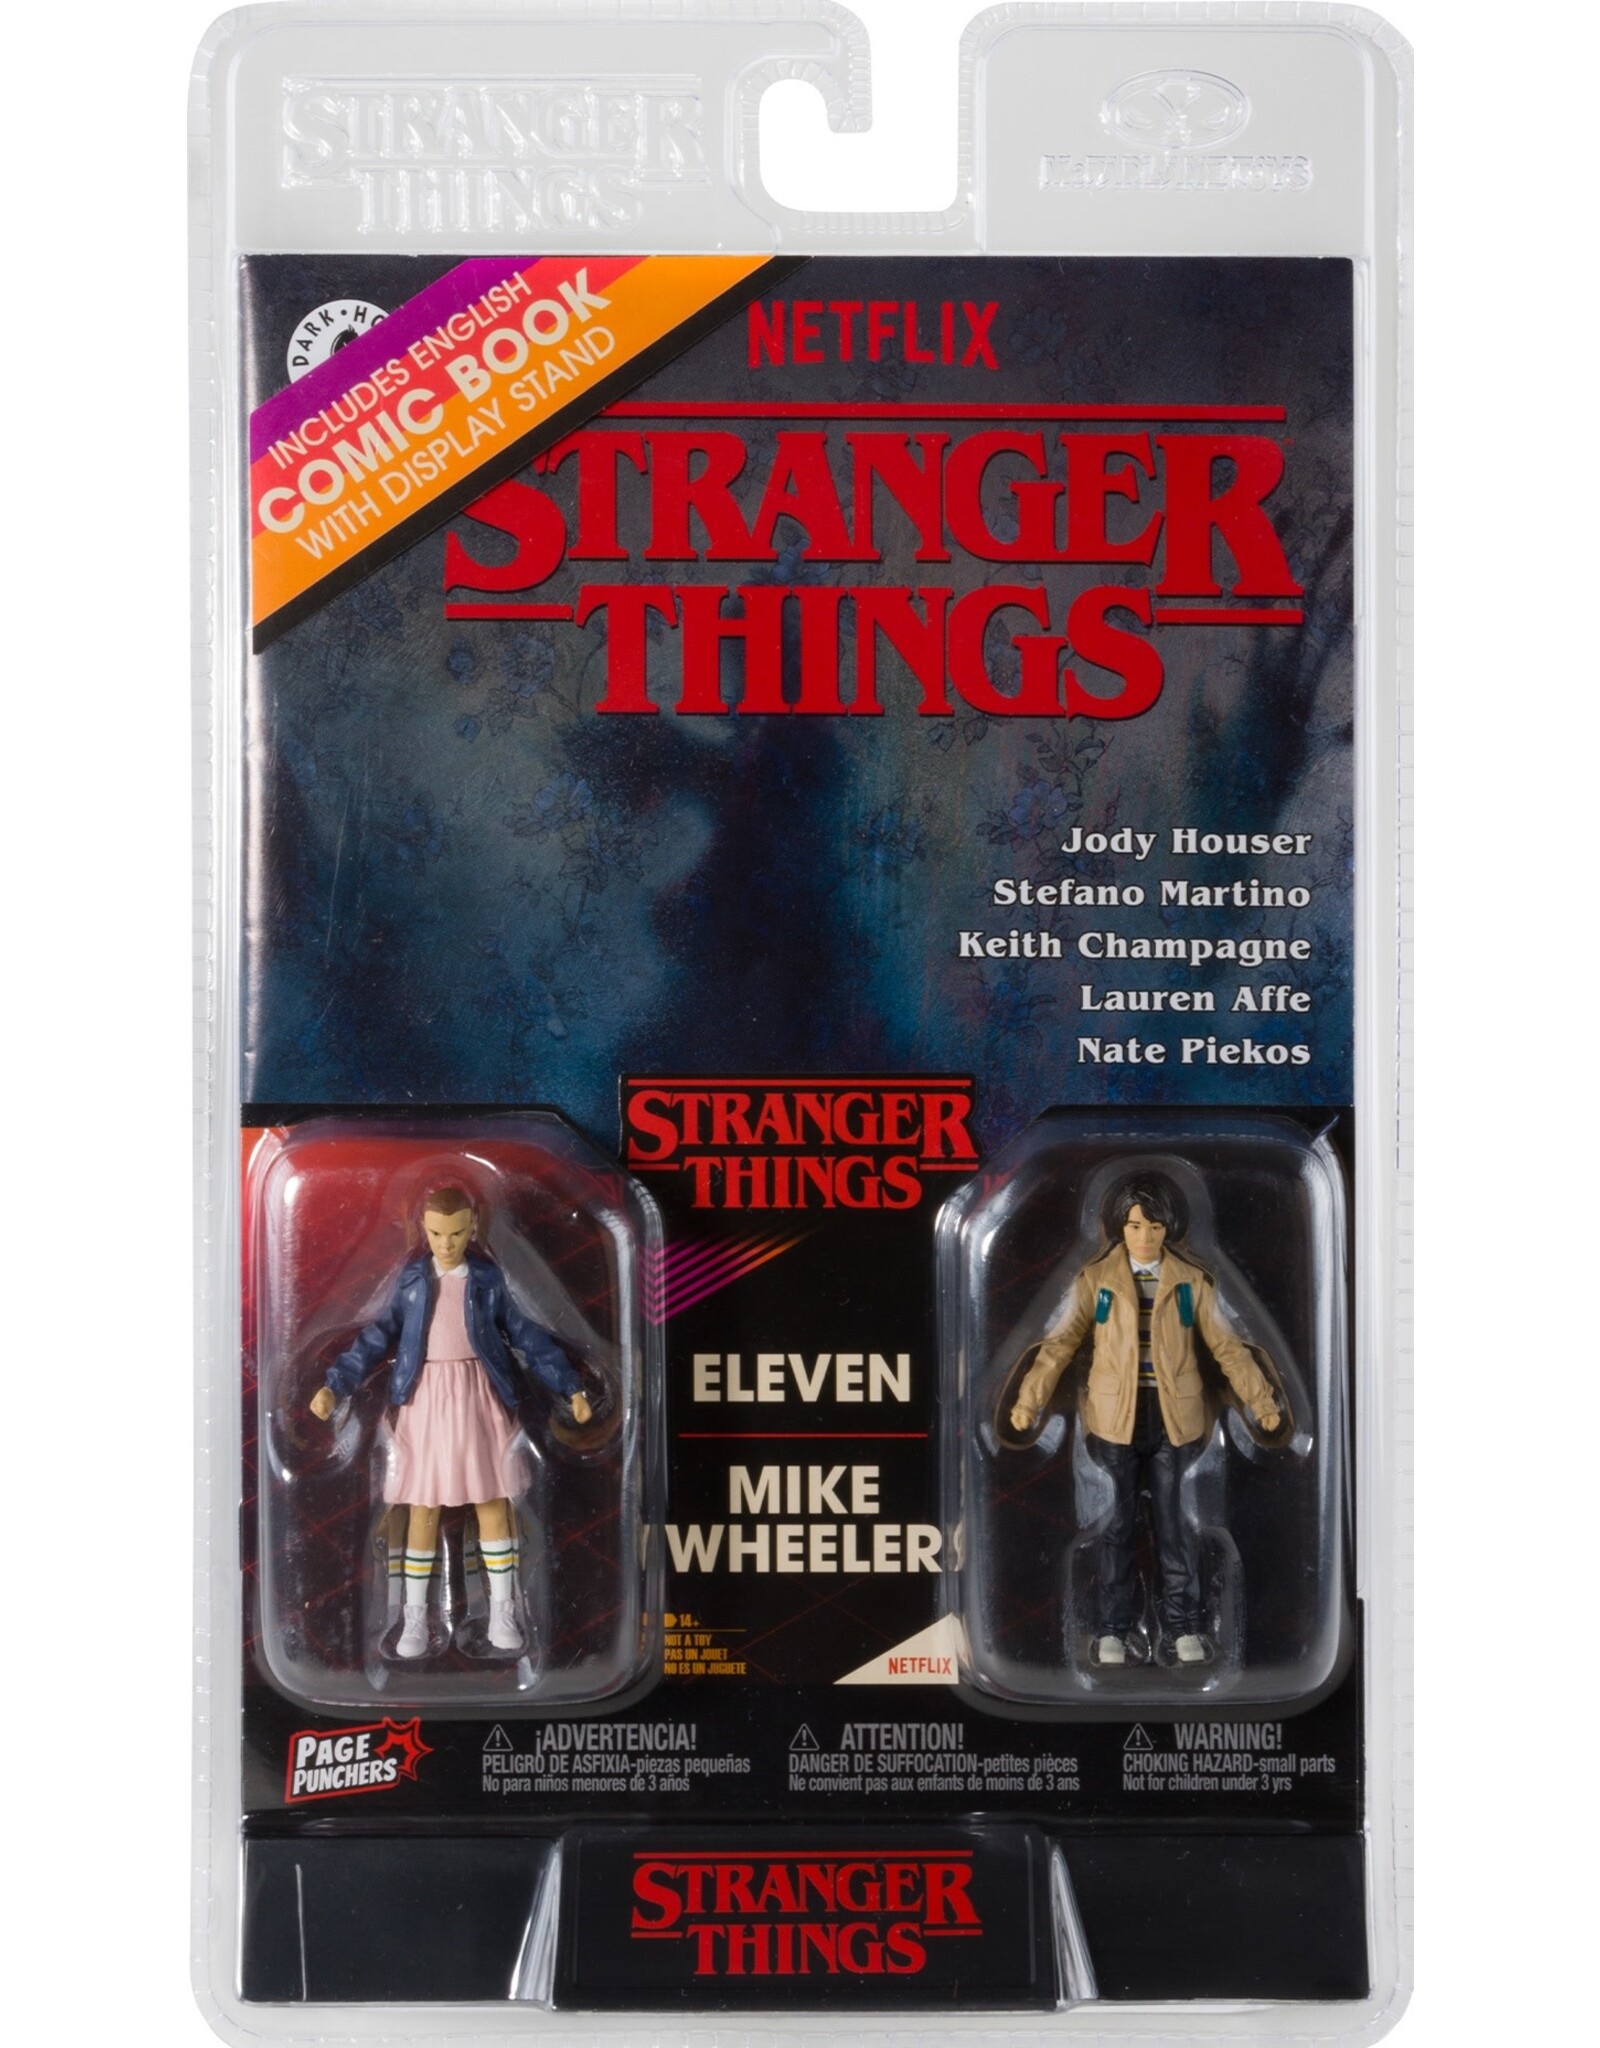 McFarlane Toys Stranger Things - 3" Figures w/ Comic (Eleven/Mike)